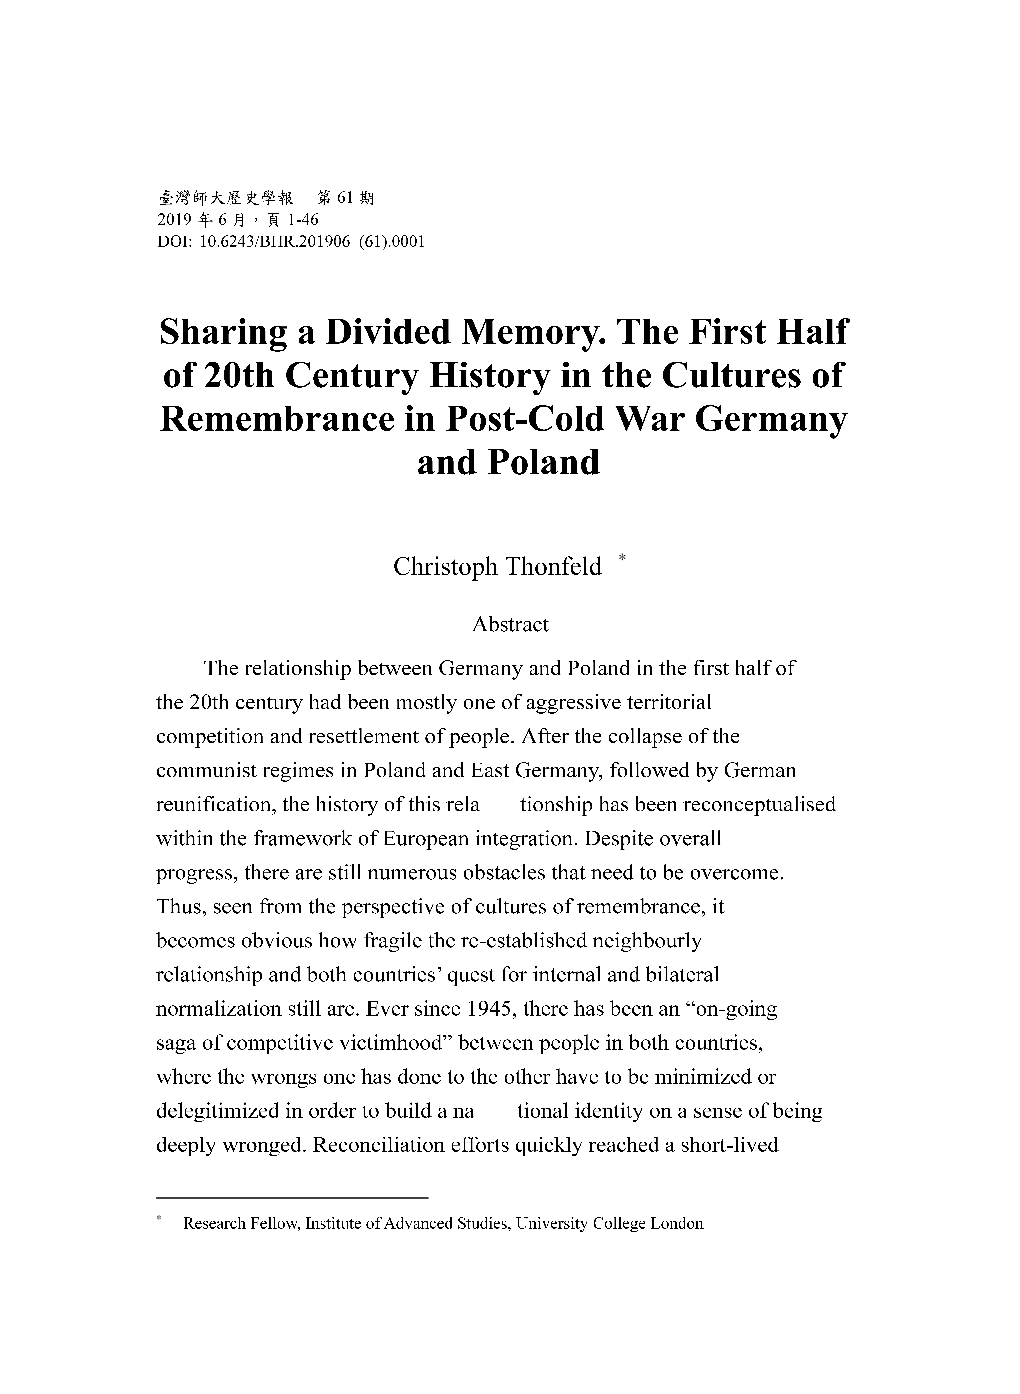 Sharing a Divided Memory. the First Half of 20Th Century History in the Cultures of Remembrance in Post-Cold War Germany and Poland